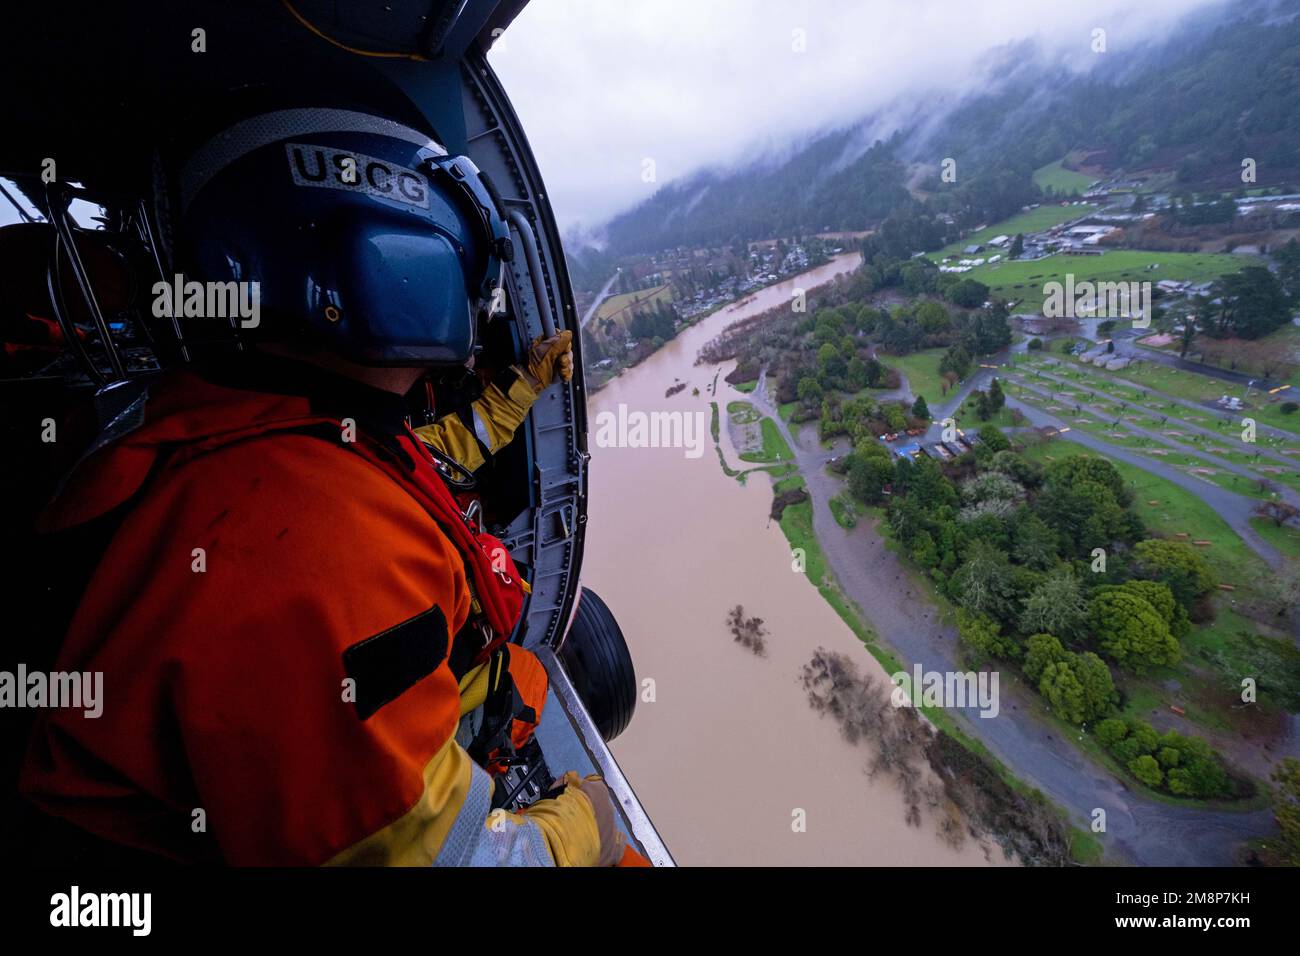 California, USA. 11th Jan, 2023. Petty Officer 3rd Class Clayton Maidlow, an Aviation Survival Technician stationed at Coast Guard Air Station Astoria, surveys a flooded region of the Russian River during an overflight mission on January 11, 2023. U.S. Coast Guard aircrews deployed to the San francisco Bay Area from across the west coast in response to the recent flooding. Credit: U.S. Coast Guard/ZUMA Press Wire Service/ZUMAPRESS.com/Alamy Live News Stock Photo